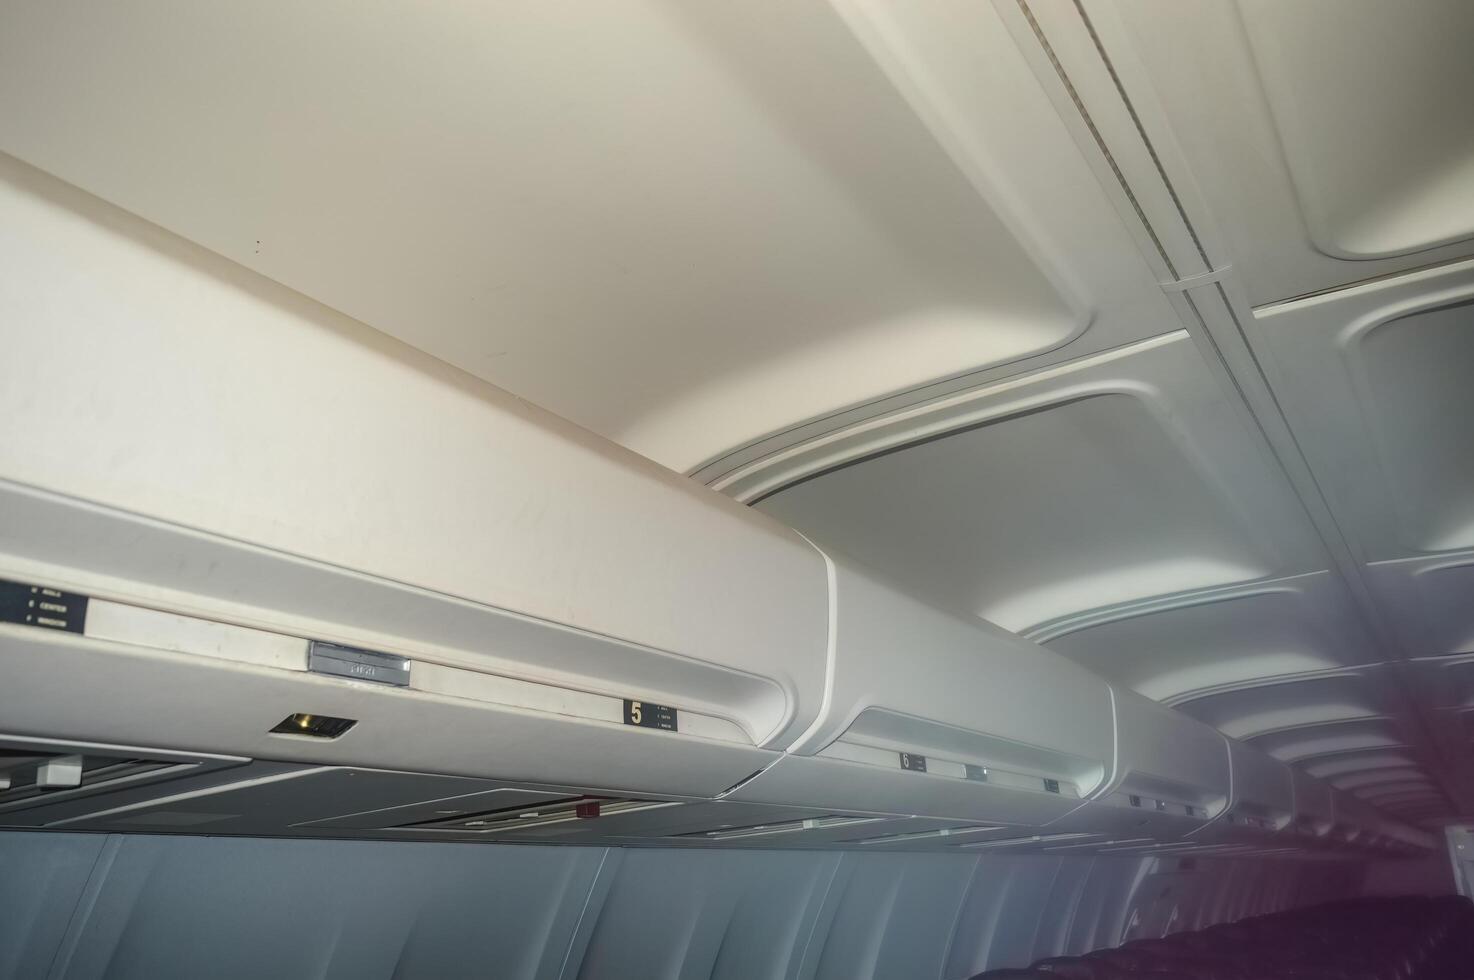 Overhead bin in the aircraft interior for storing passenger luggage photo